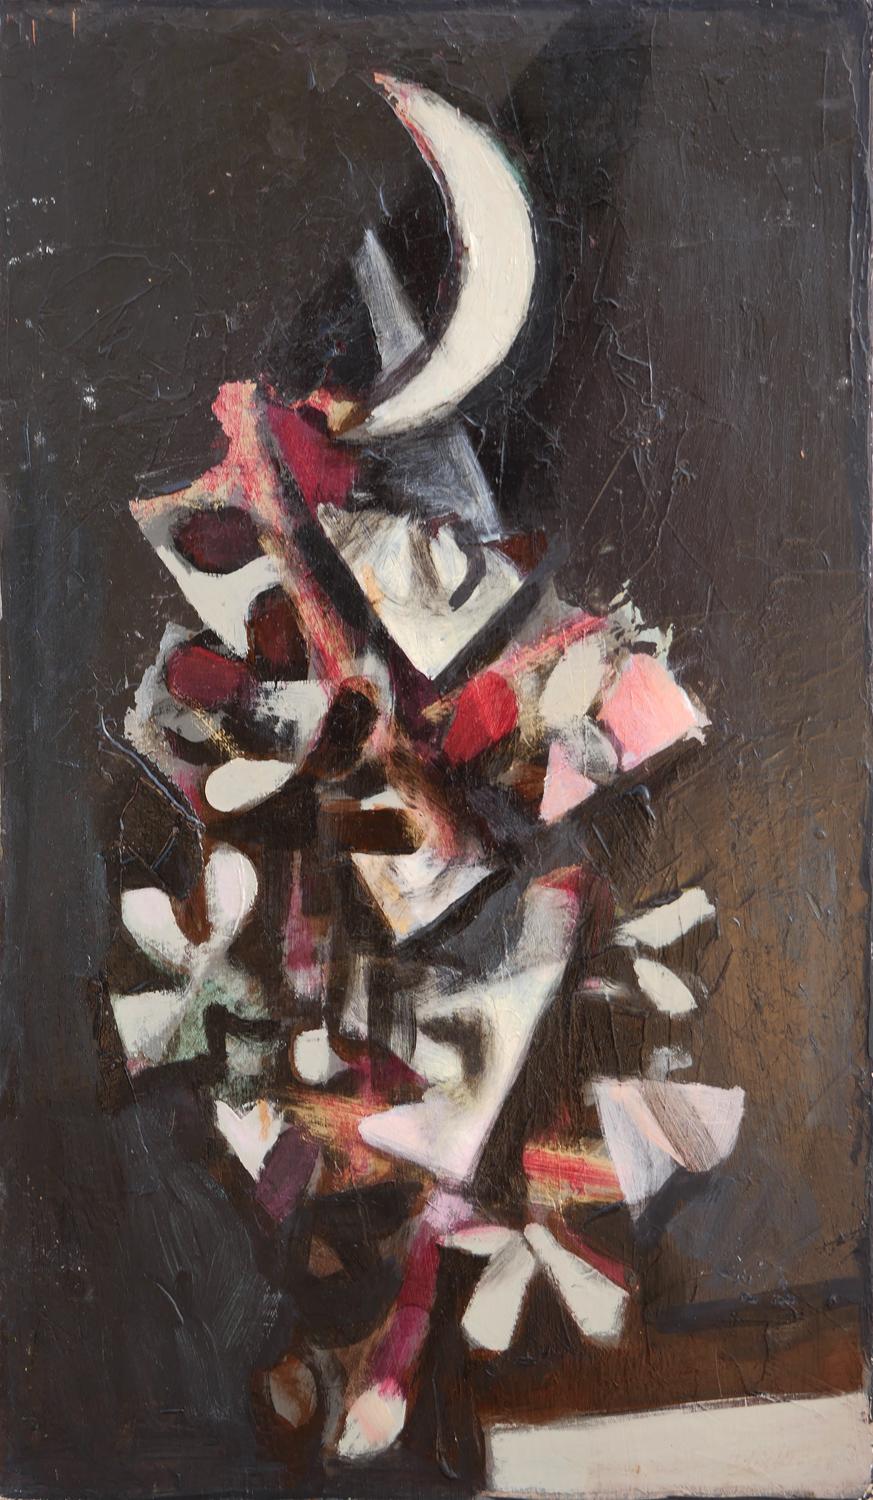 Modern Cubist inspired still life night scene painting by Houston, TX artist David Adickes. The work features cream, red, and grey abstract falling leaves set against a black background. Currently unframed, but options are available.

Artist